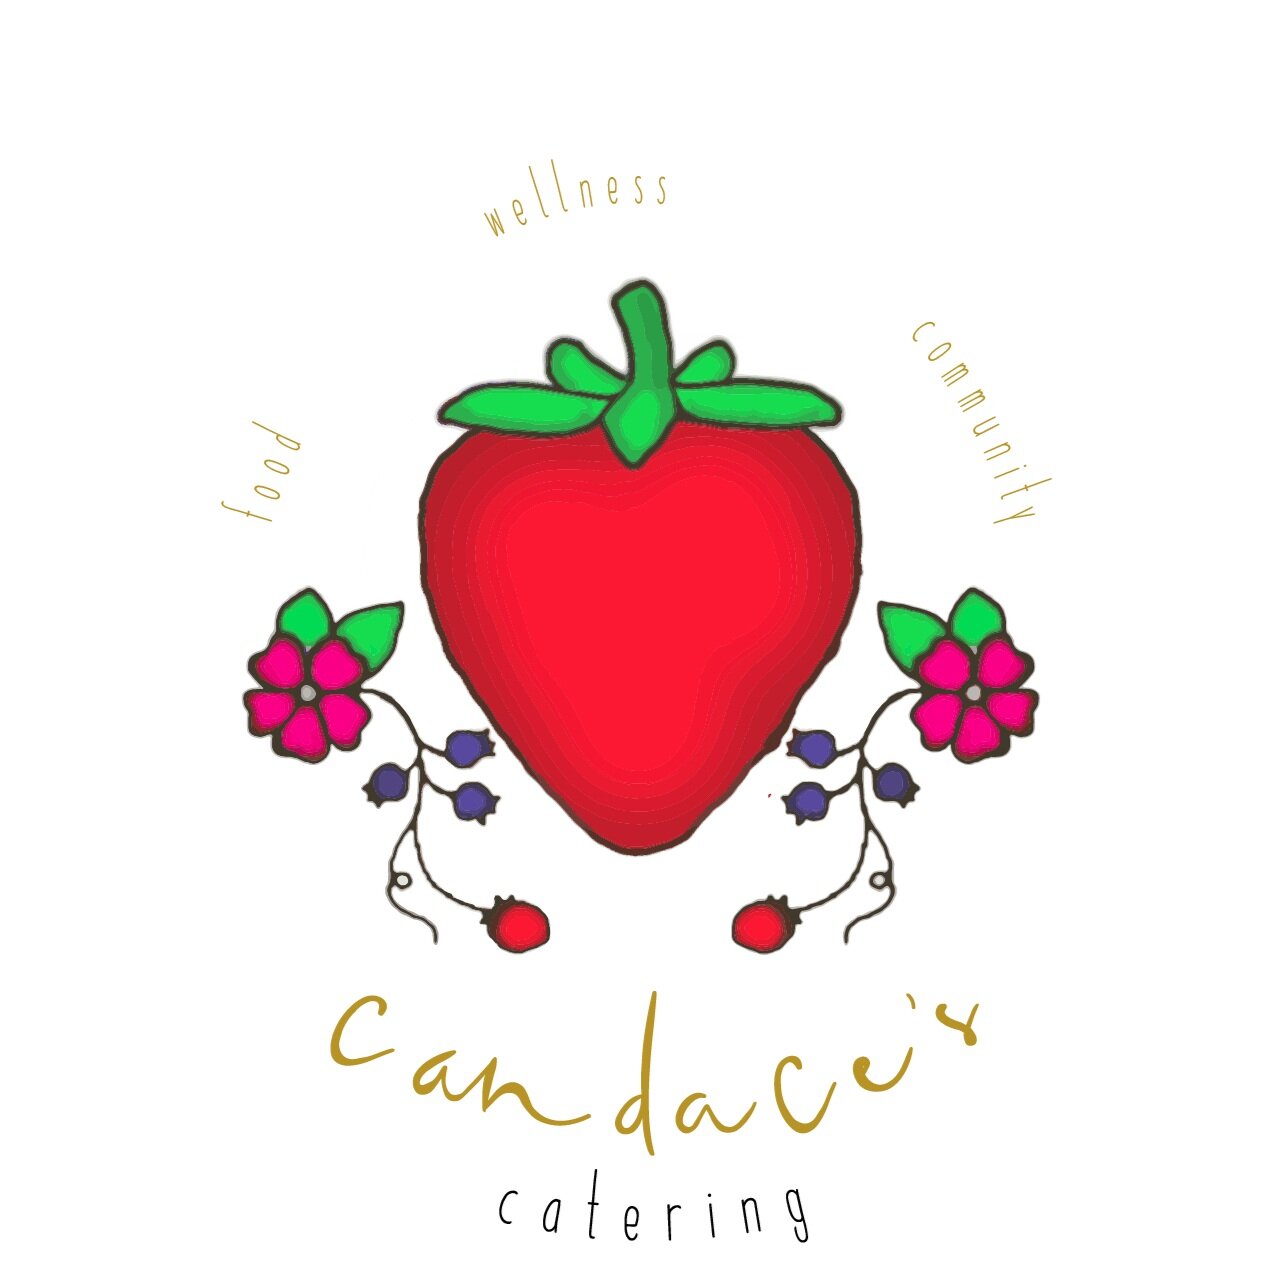 Candace's catering